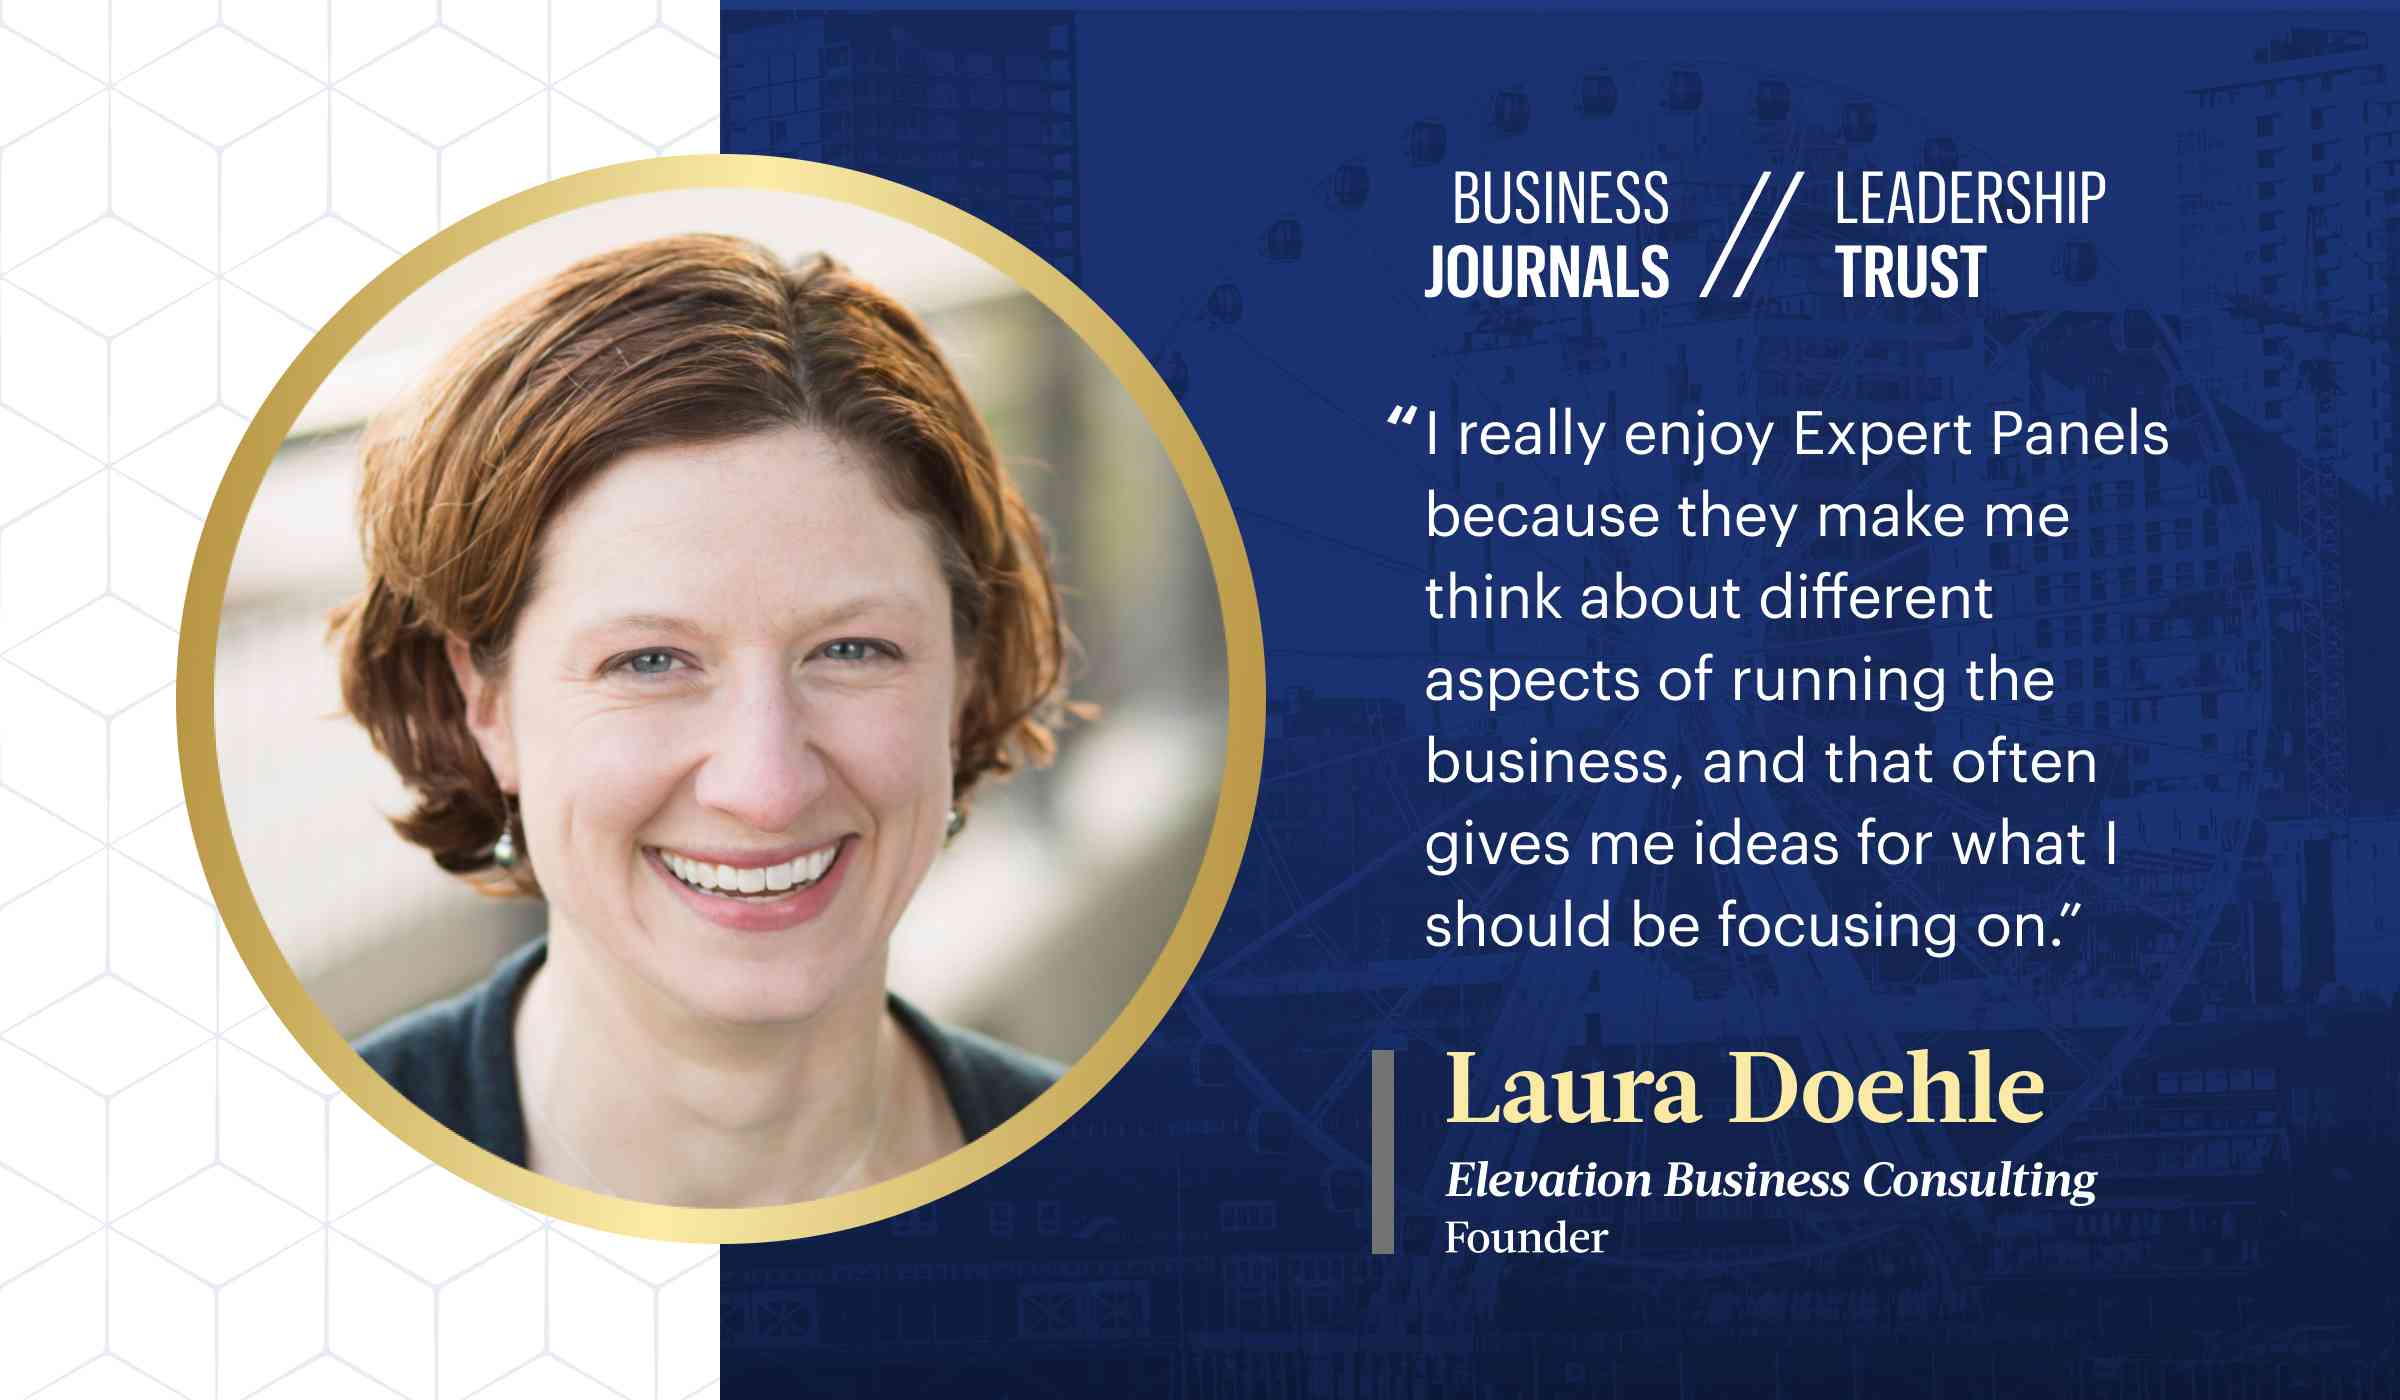 Business Journals Leadership Trust Gives Laura Doehle Increased Exposure and Credibility